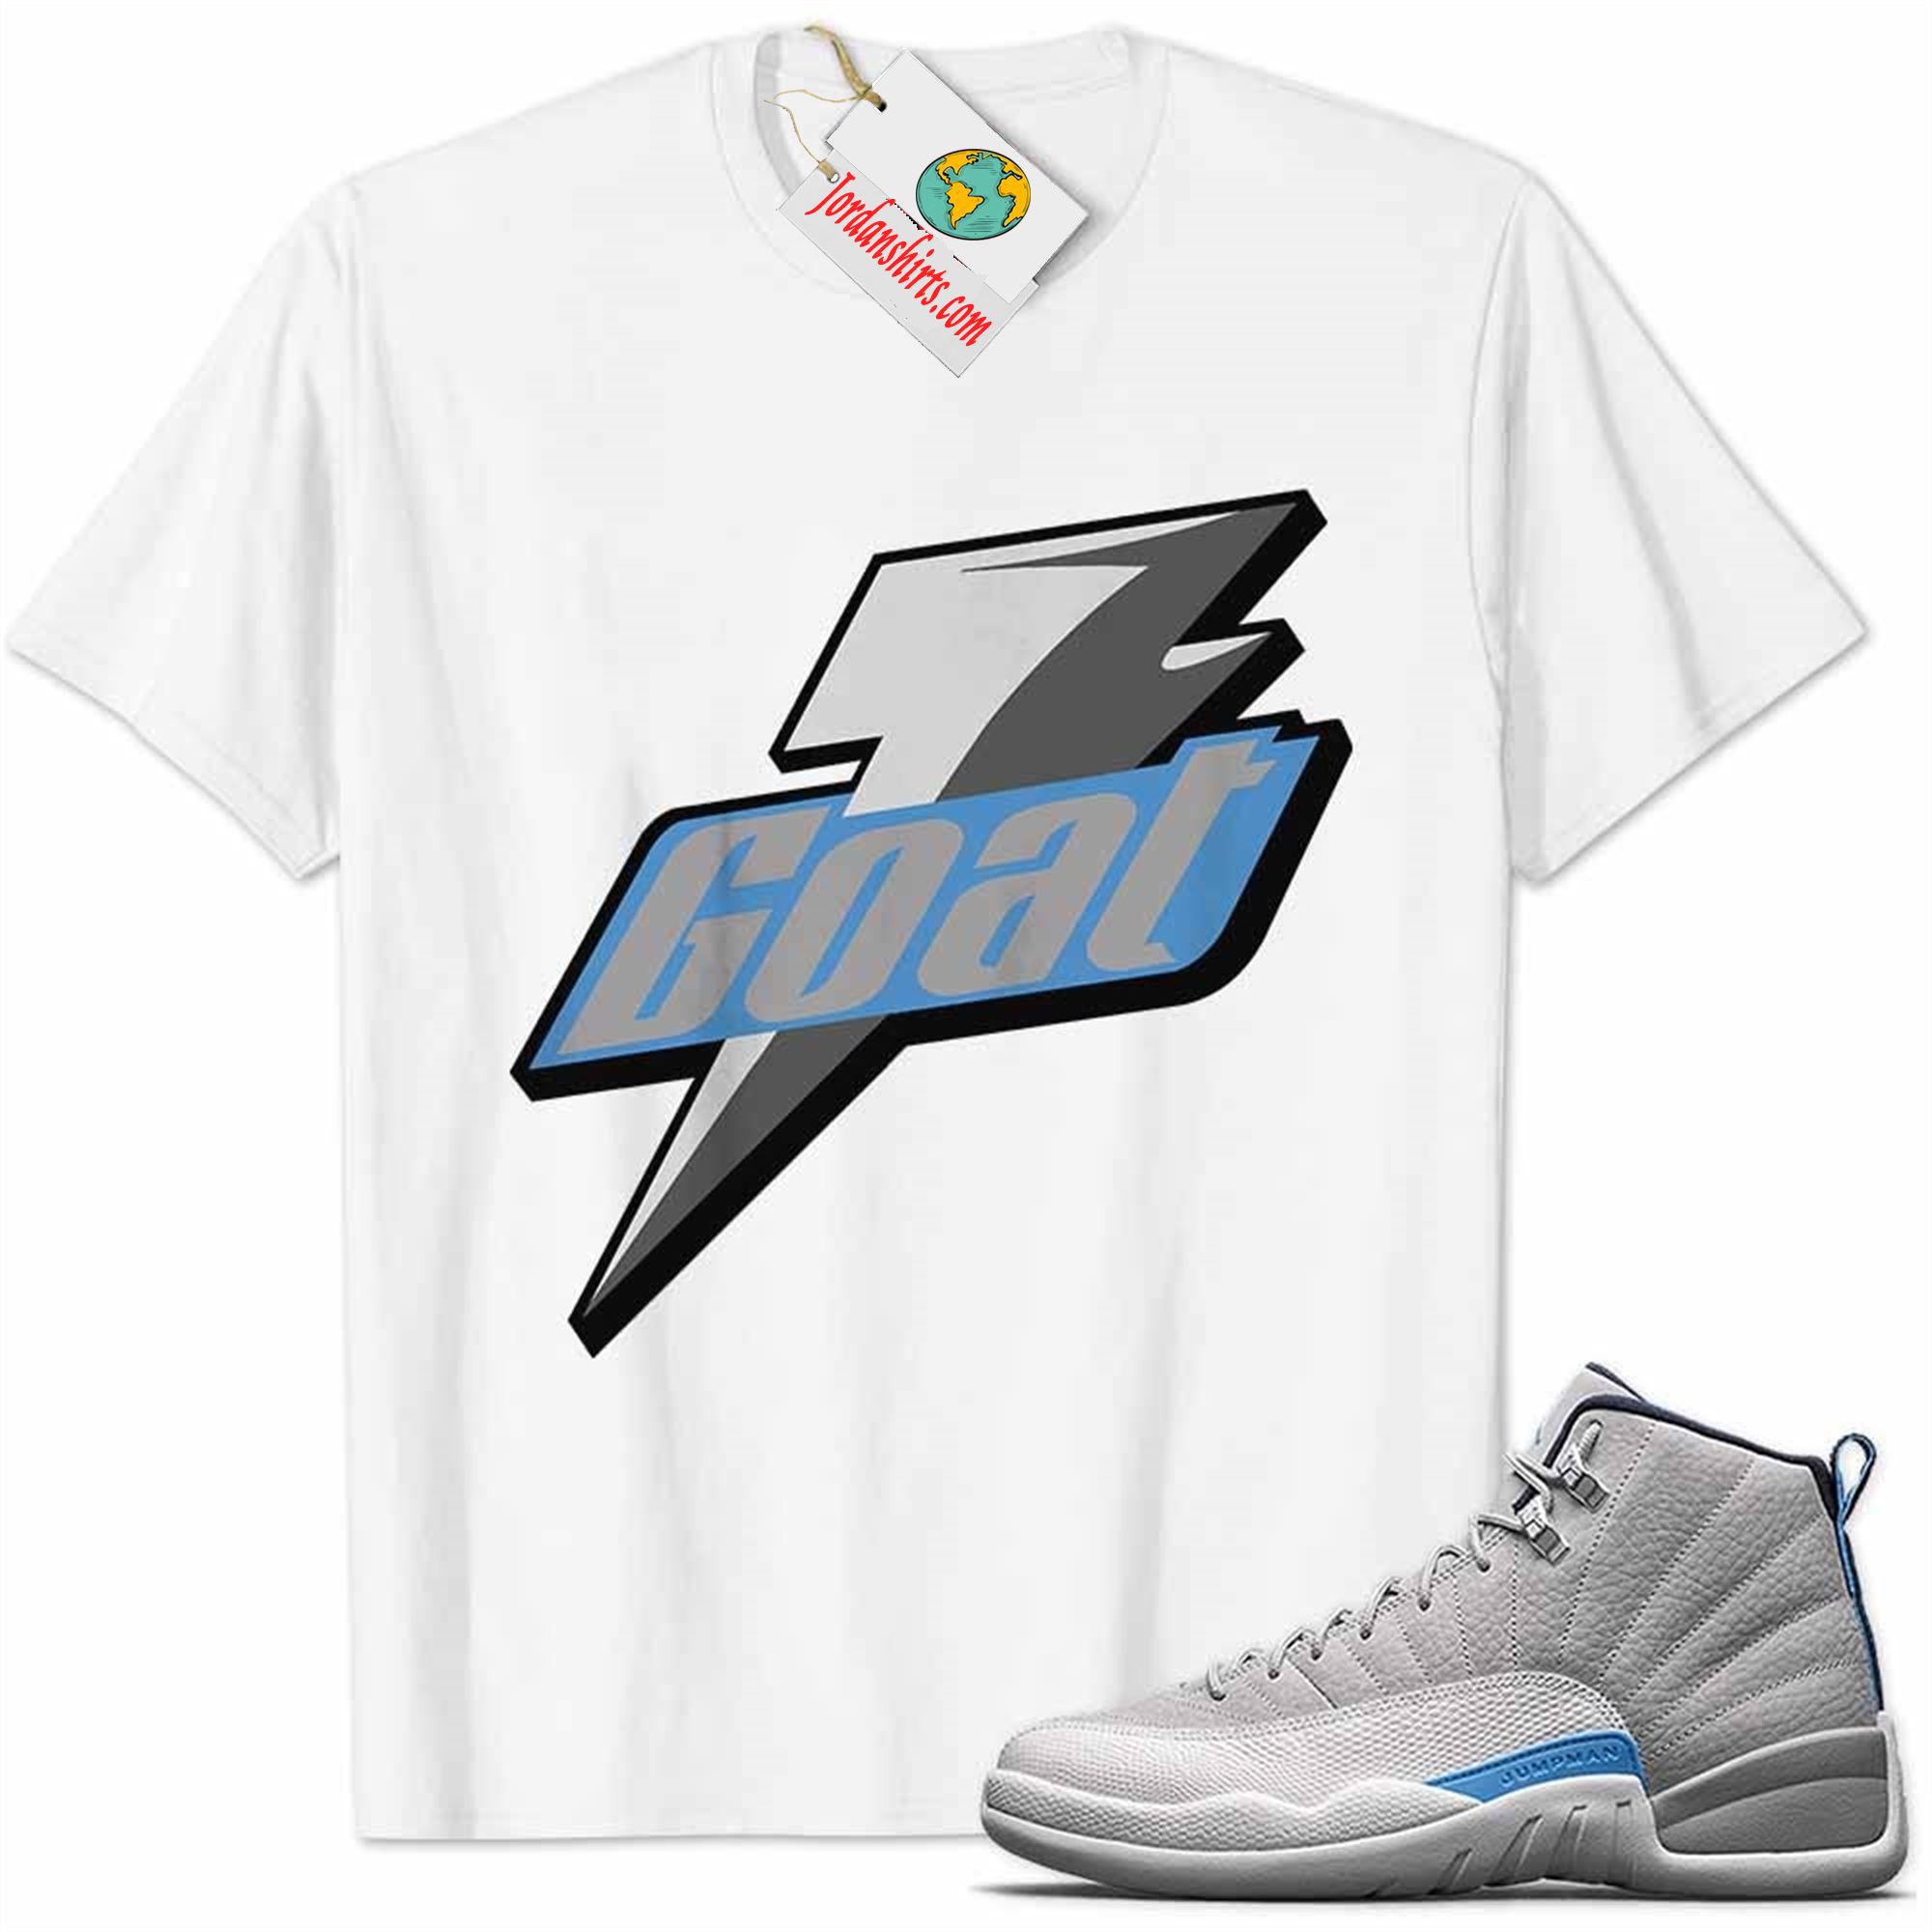 Jordan 12 Shirt, Wolf Grey 12s Shirt Goat Greatest Of All Time White Full Size Up To 5xl